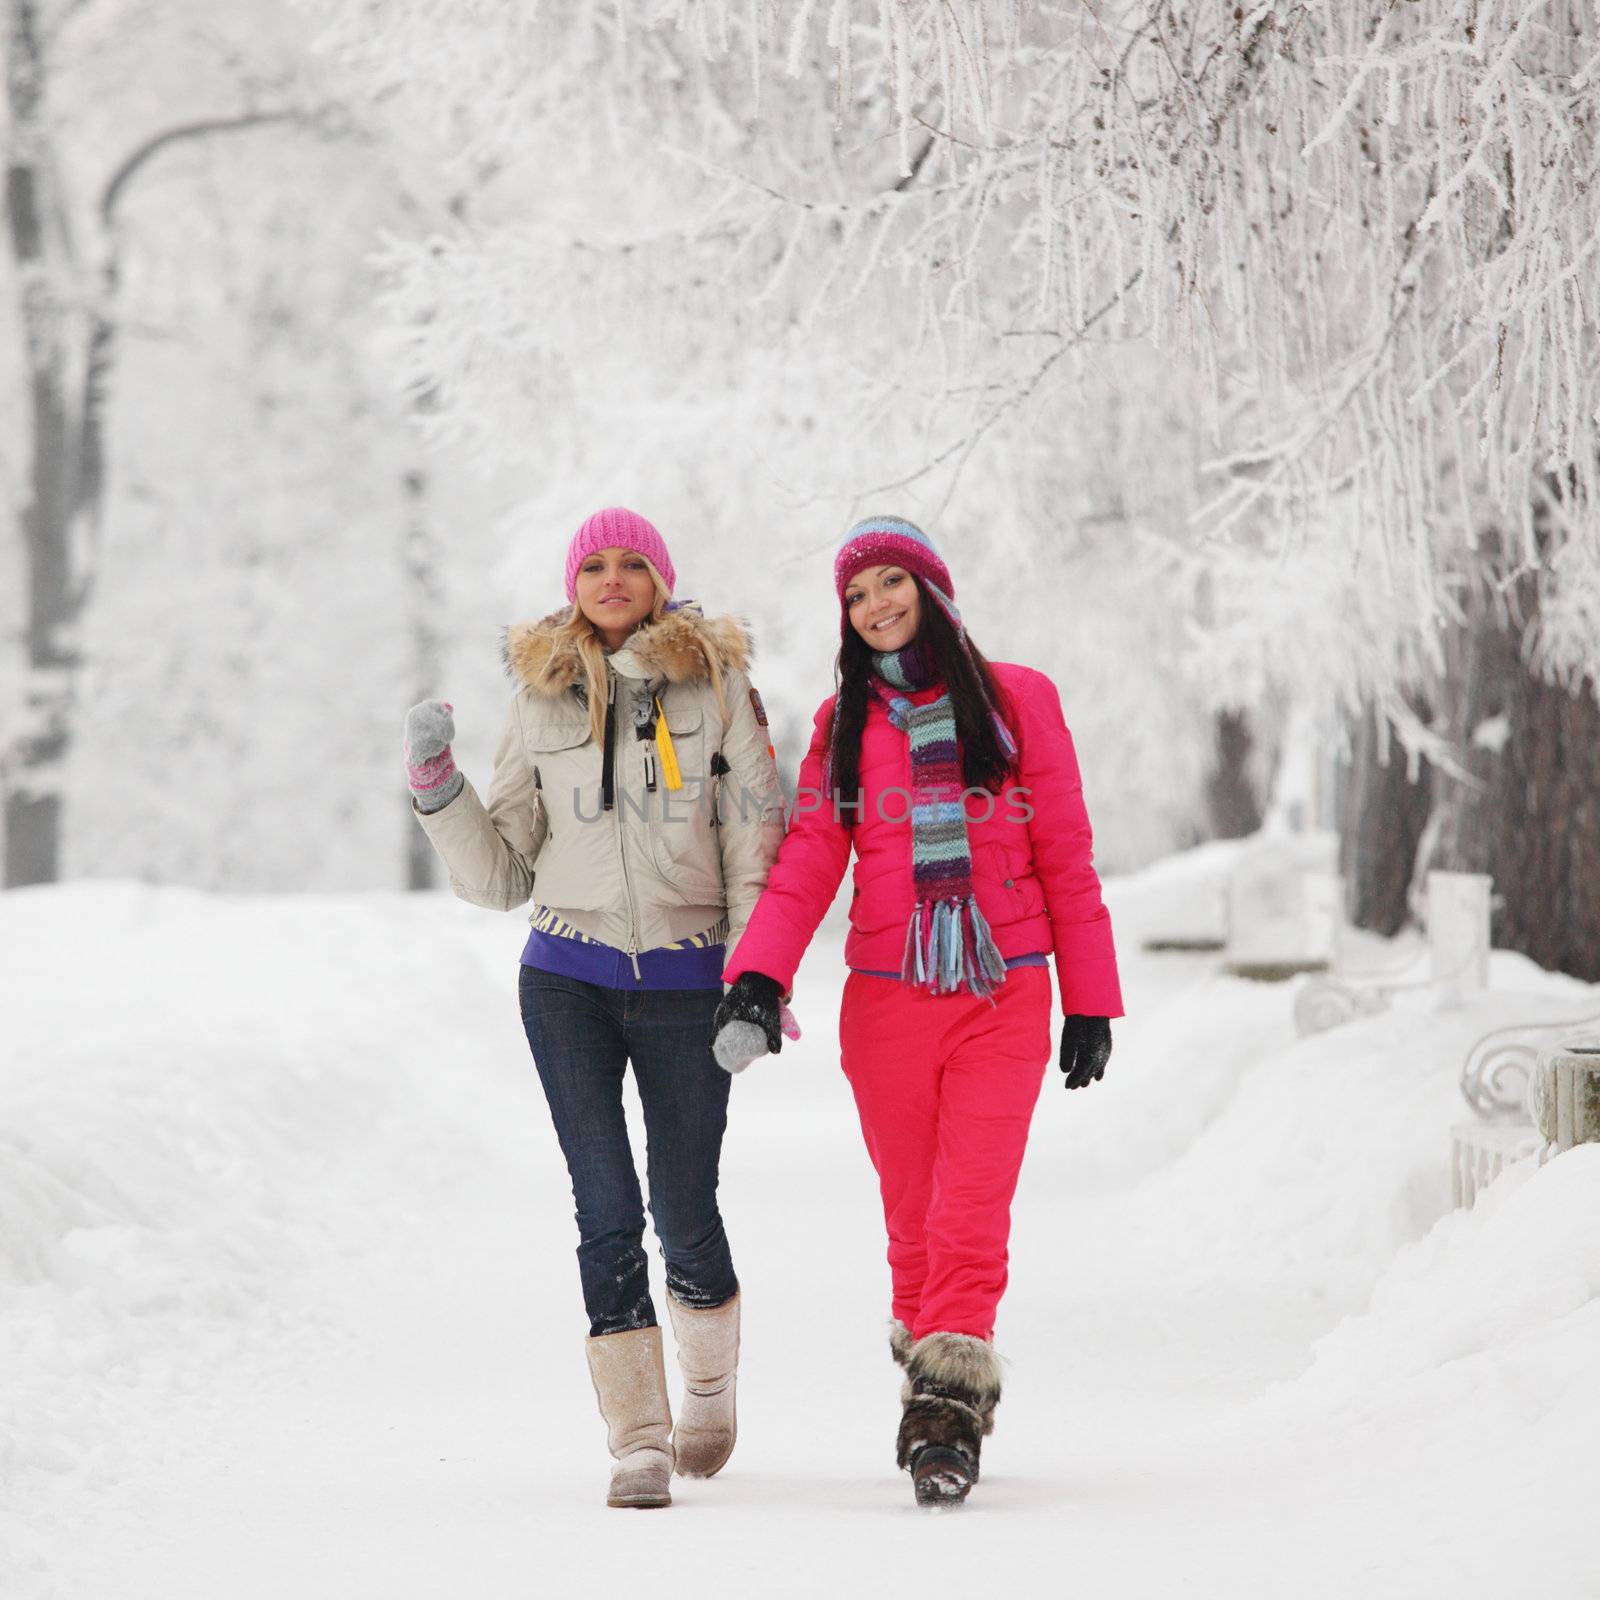 two winter women run by snow frosted alley